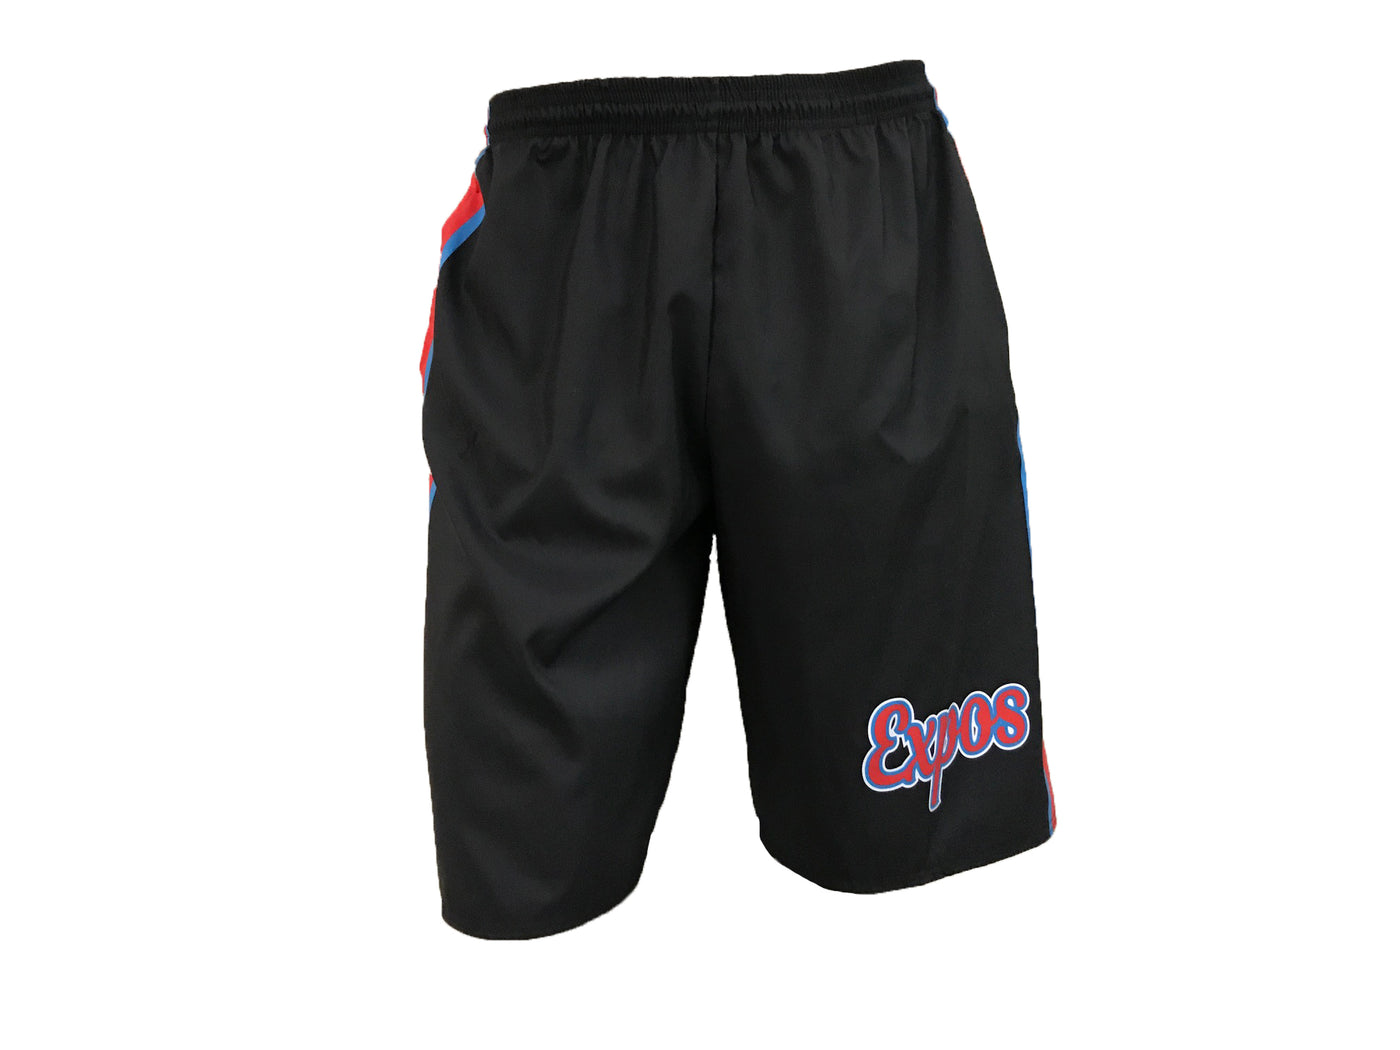 CHICAGO BULLS SUBLIMATION PANTS (NEW ARRIVAL) HIGH QUALITY